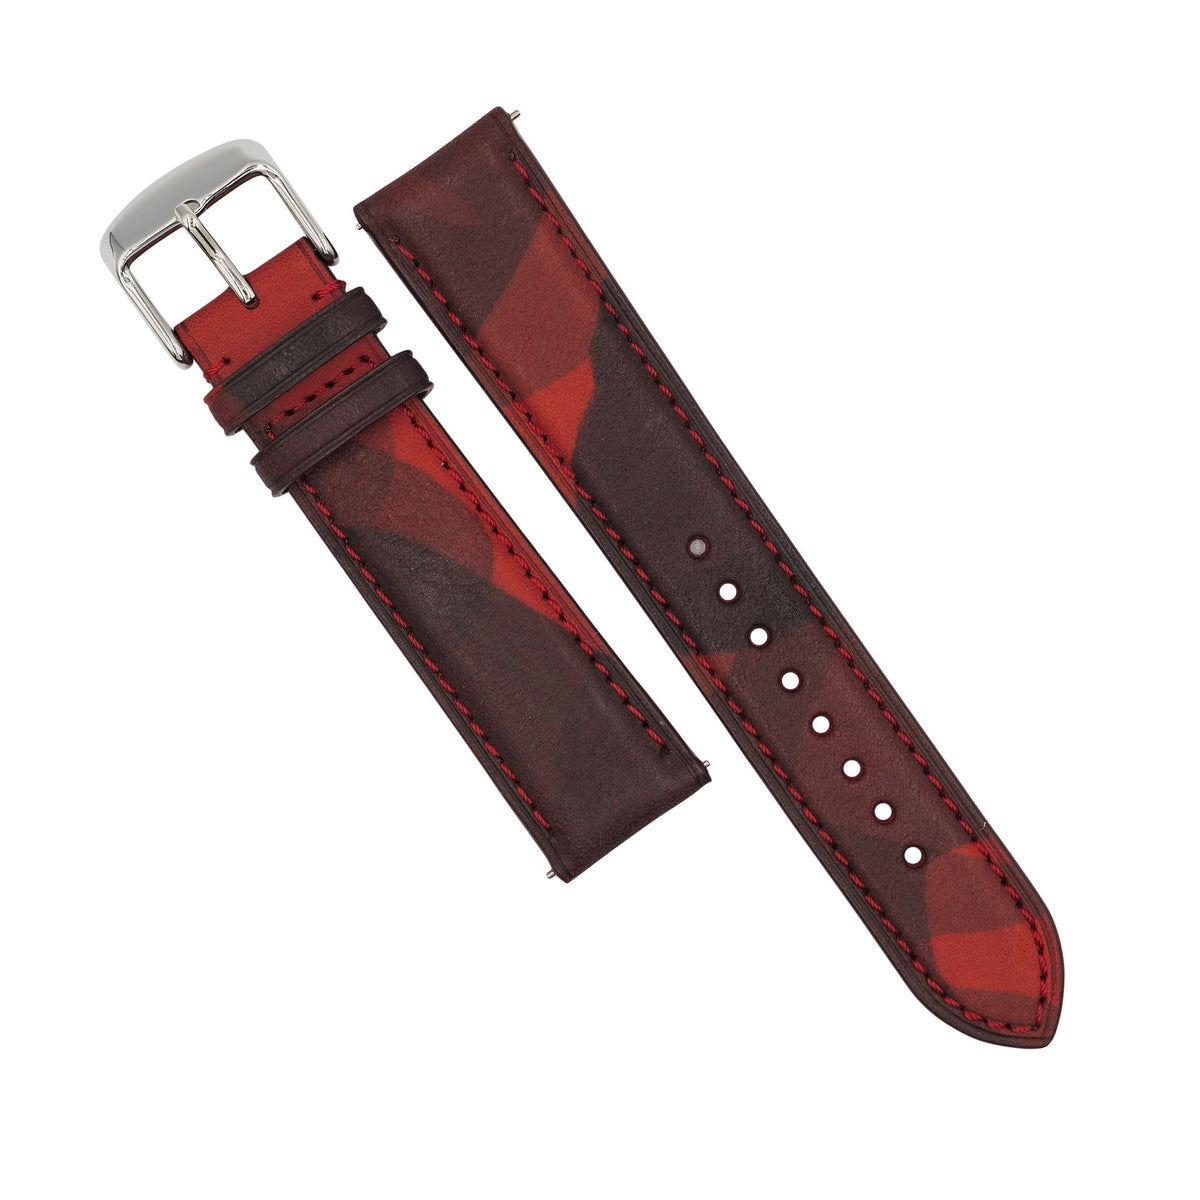 Emery Classic LPA Camo Leather Strap in Red Camo (18mm) - Nomad Watch Works MY